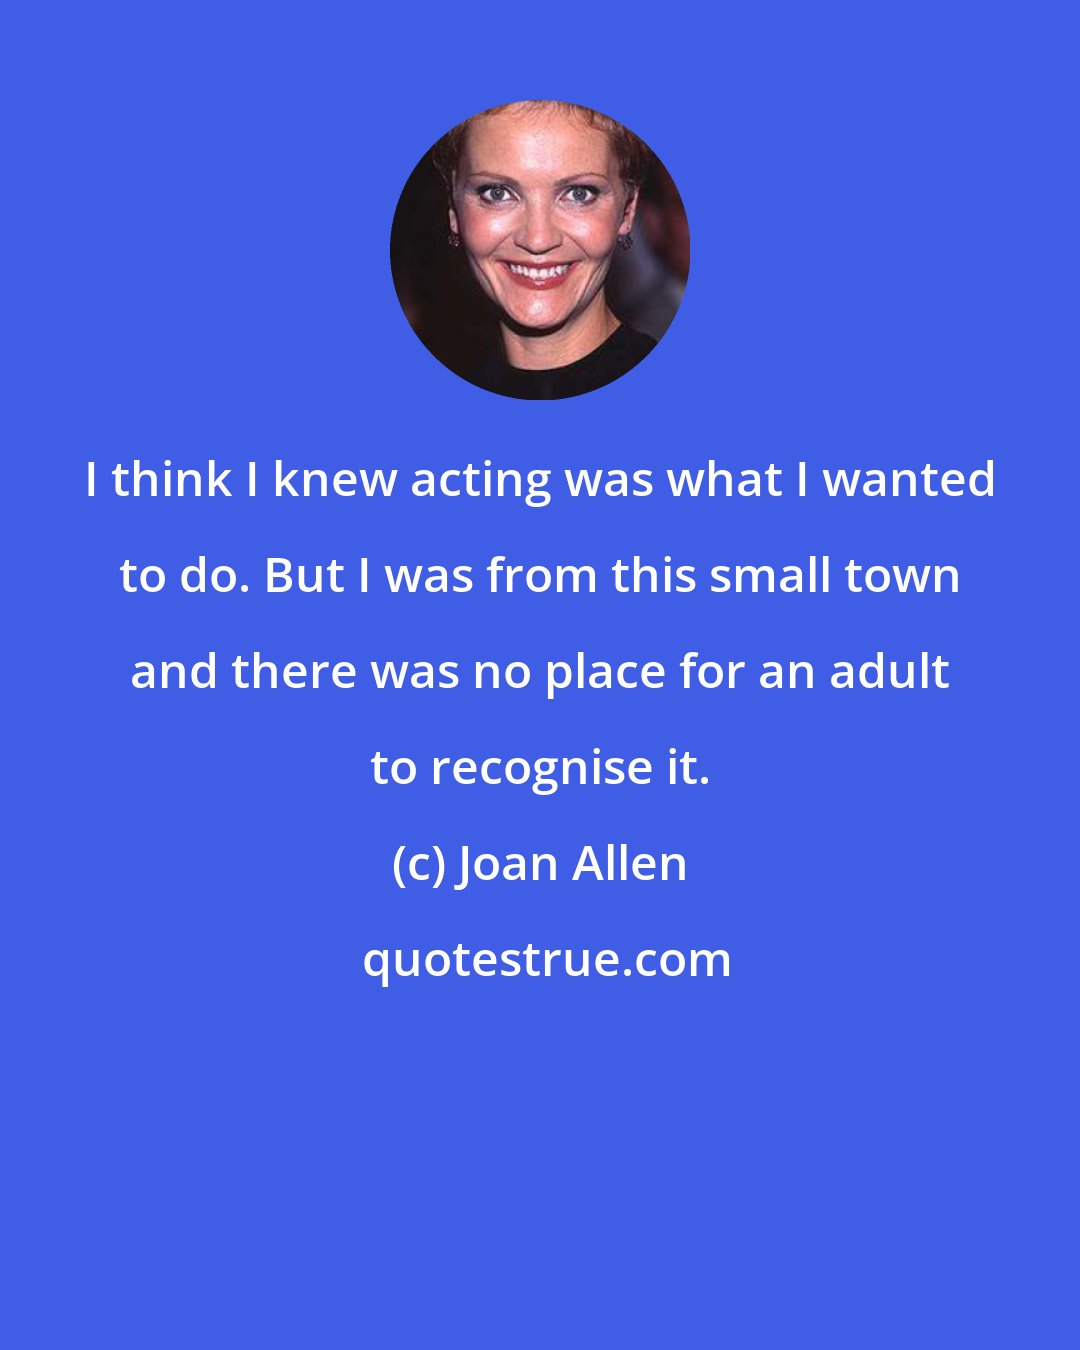 Joan Allen: I think I knew acting was what I wanted to do. But I was from this small town and there was no place for an adult to recognise it.